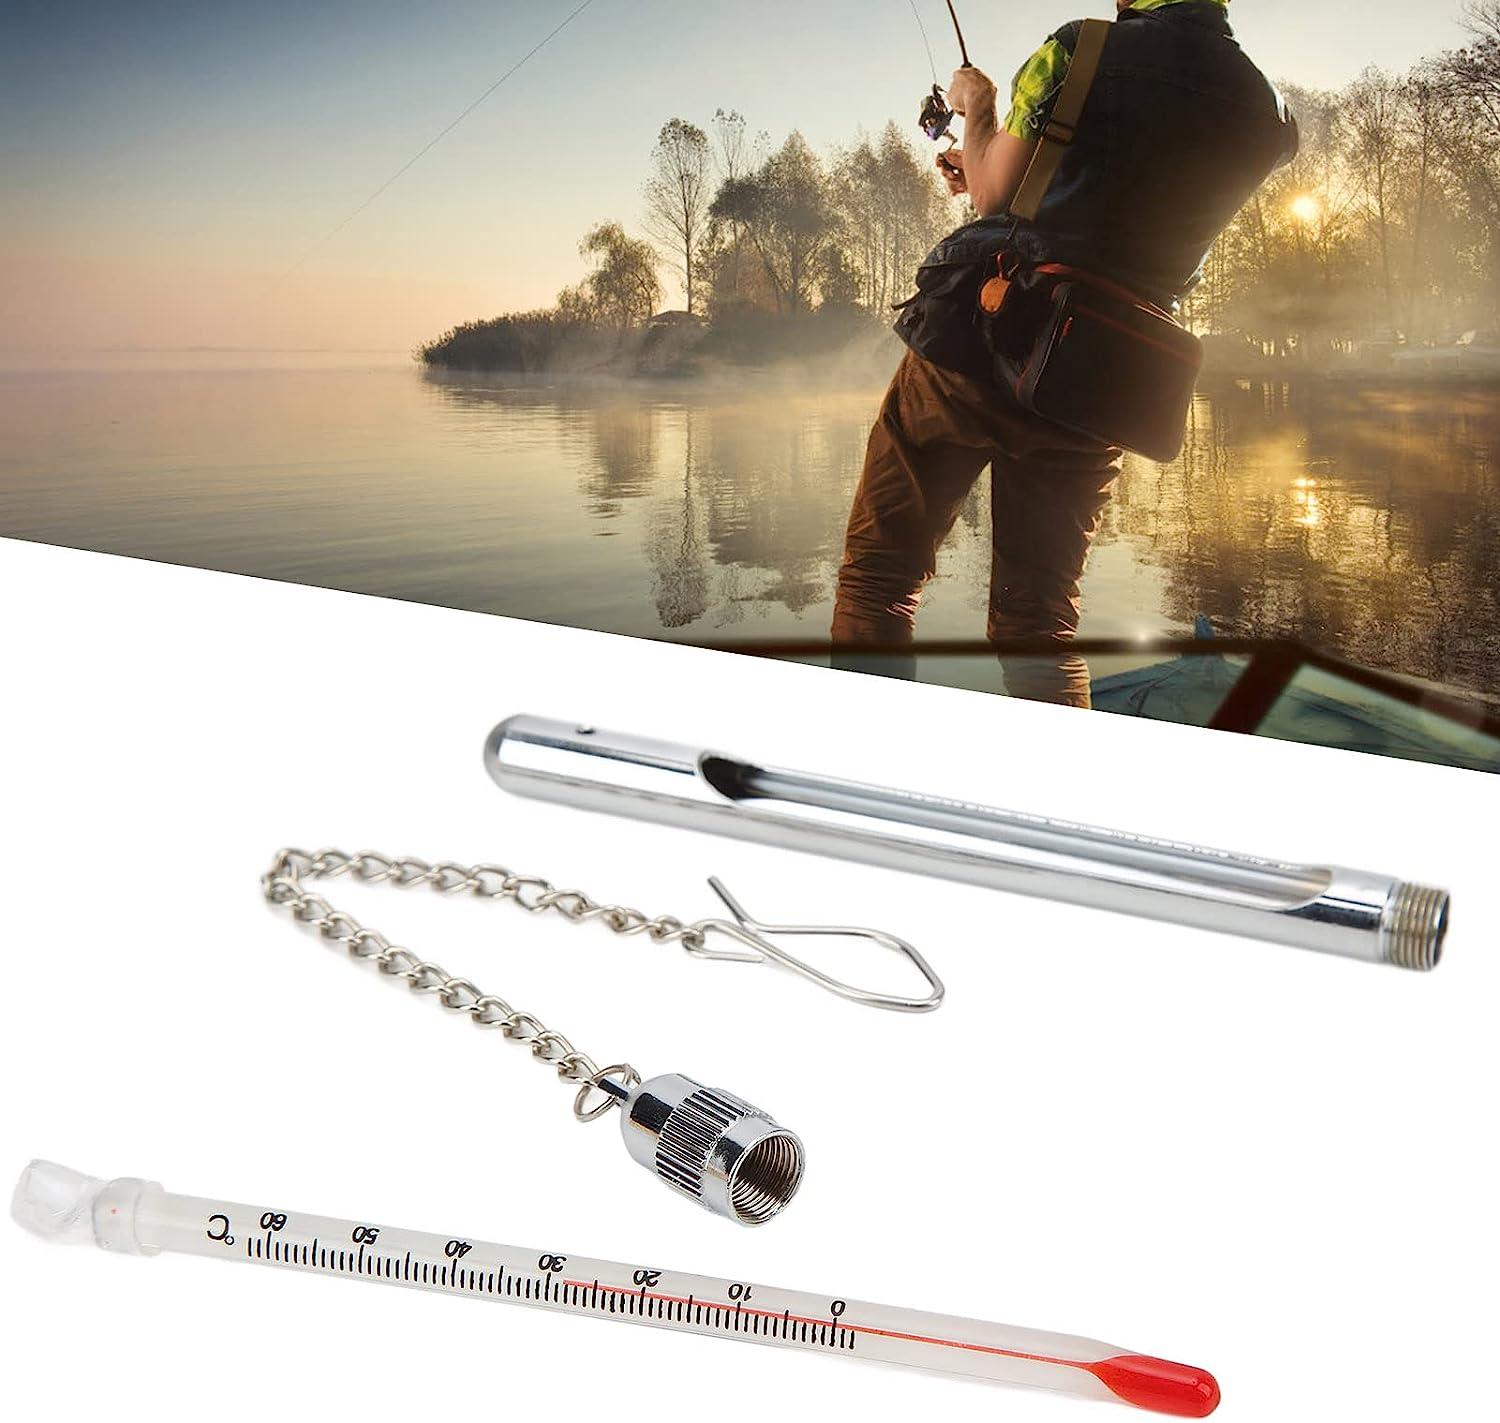 BRDI Fishing Thermometer, Practical Compact Stream Water Temperature  Measurement Tool Sustainable High Accuracy with Pocket Clip for Fly Fishing